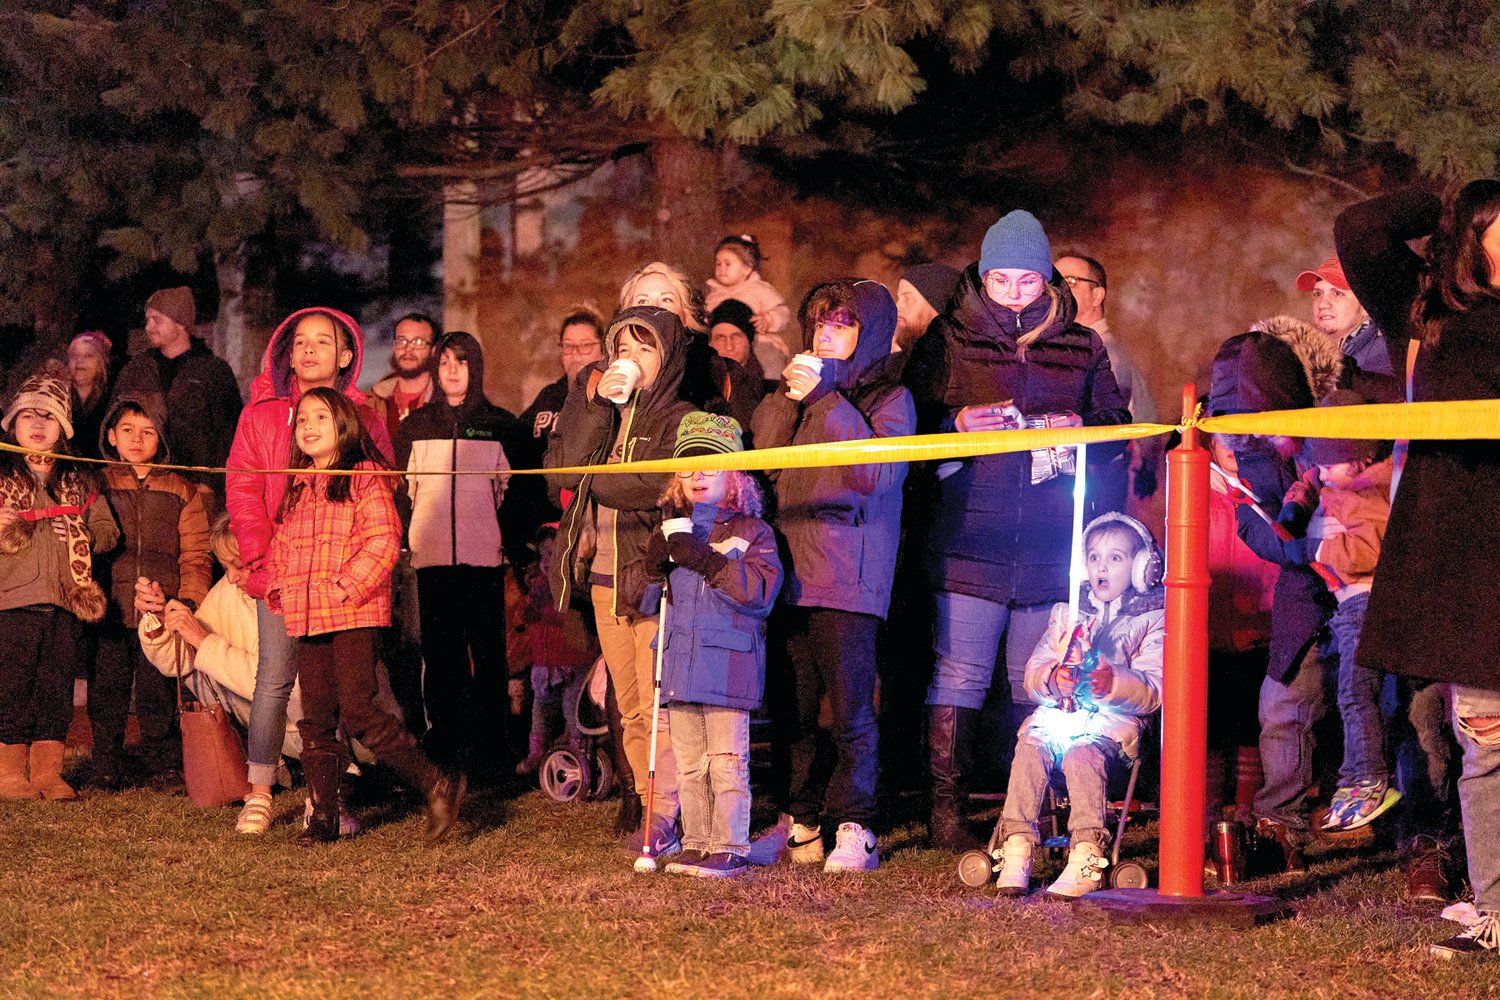 Attendees watch the fire performance at Bristol’s Mill Street Fire & Ice Event Friday, Jan. 20, 2023, in Bristol Borough.